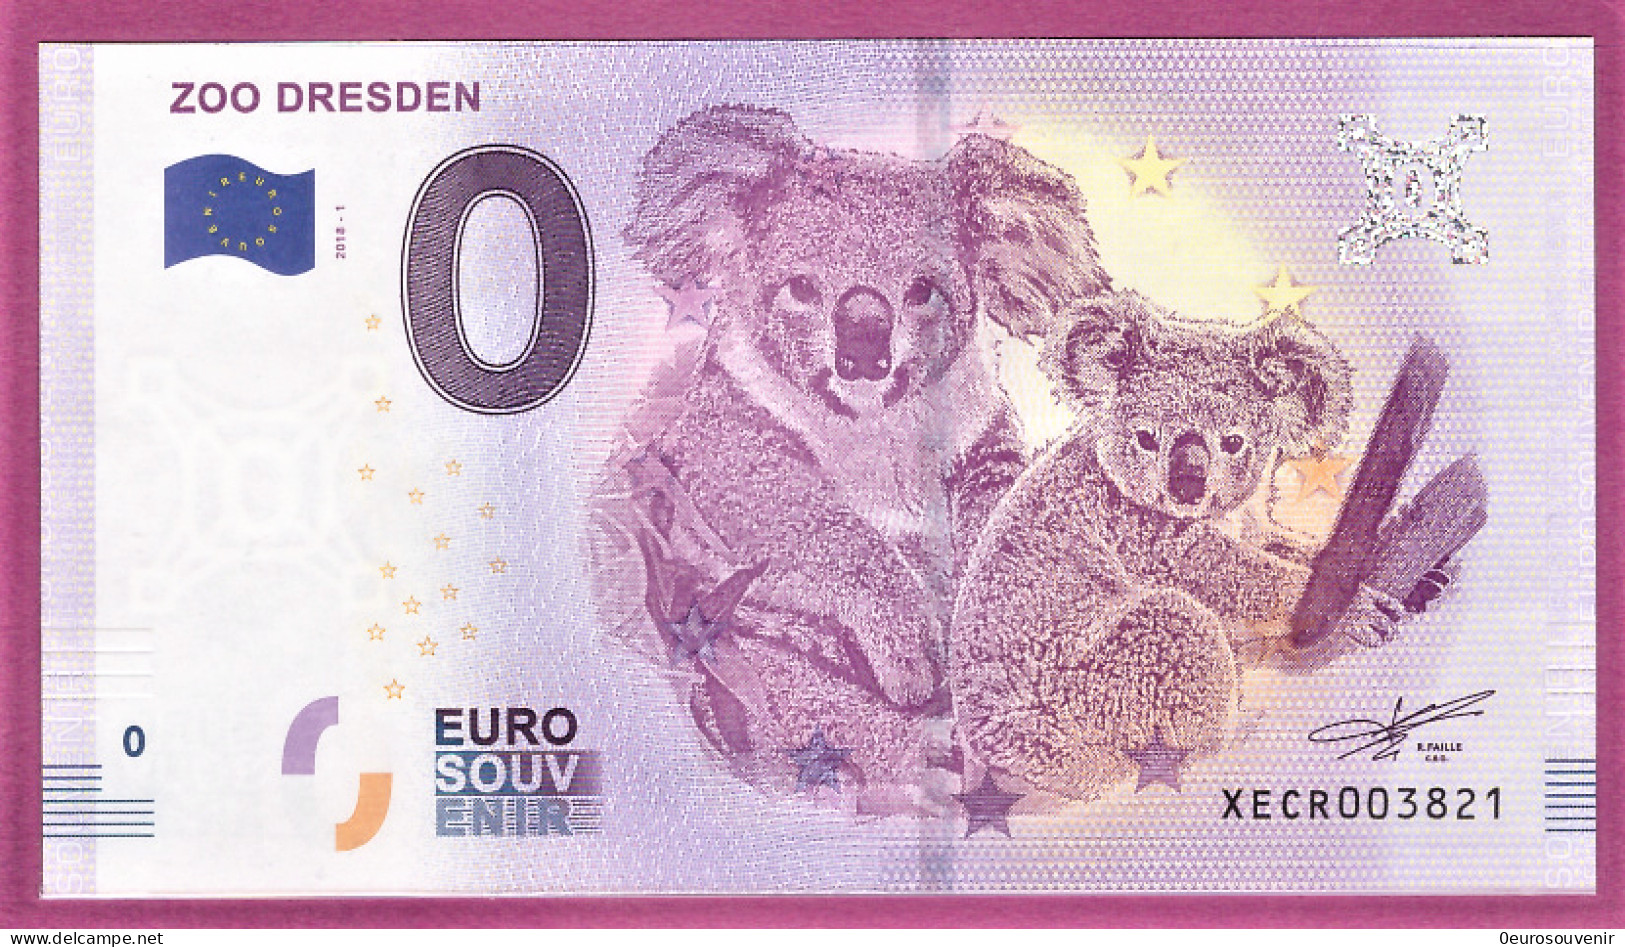 0-Euro XECR 2018-1 ZOO DRESDEN - Private Proofs / Unofficial